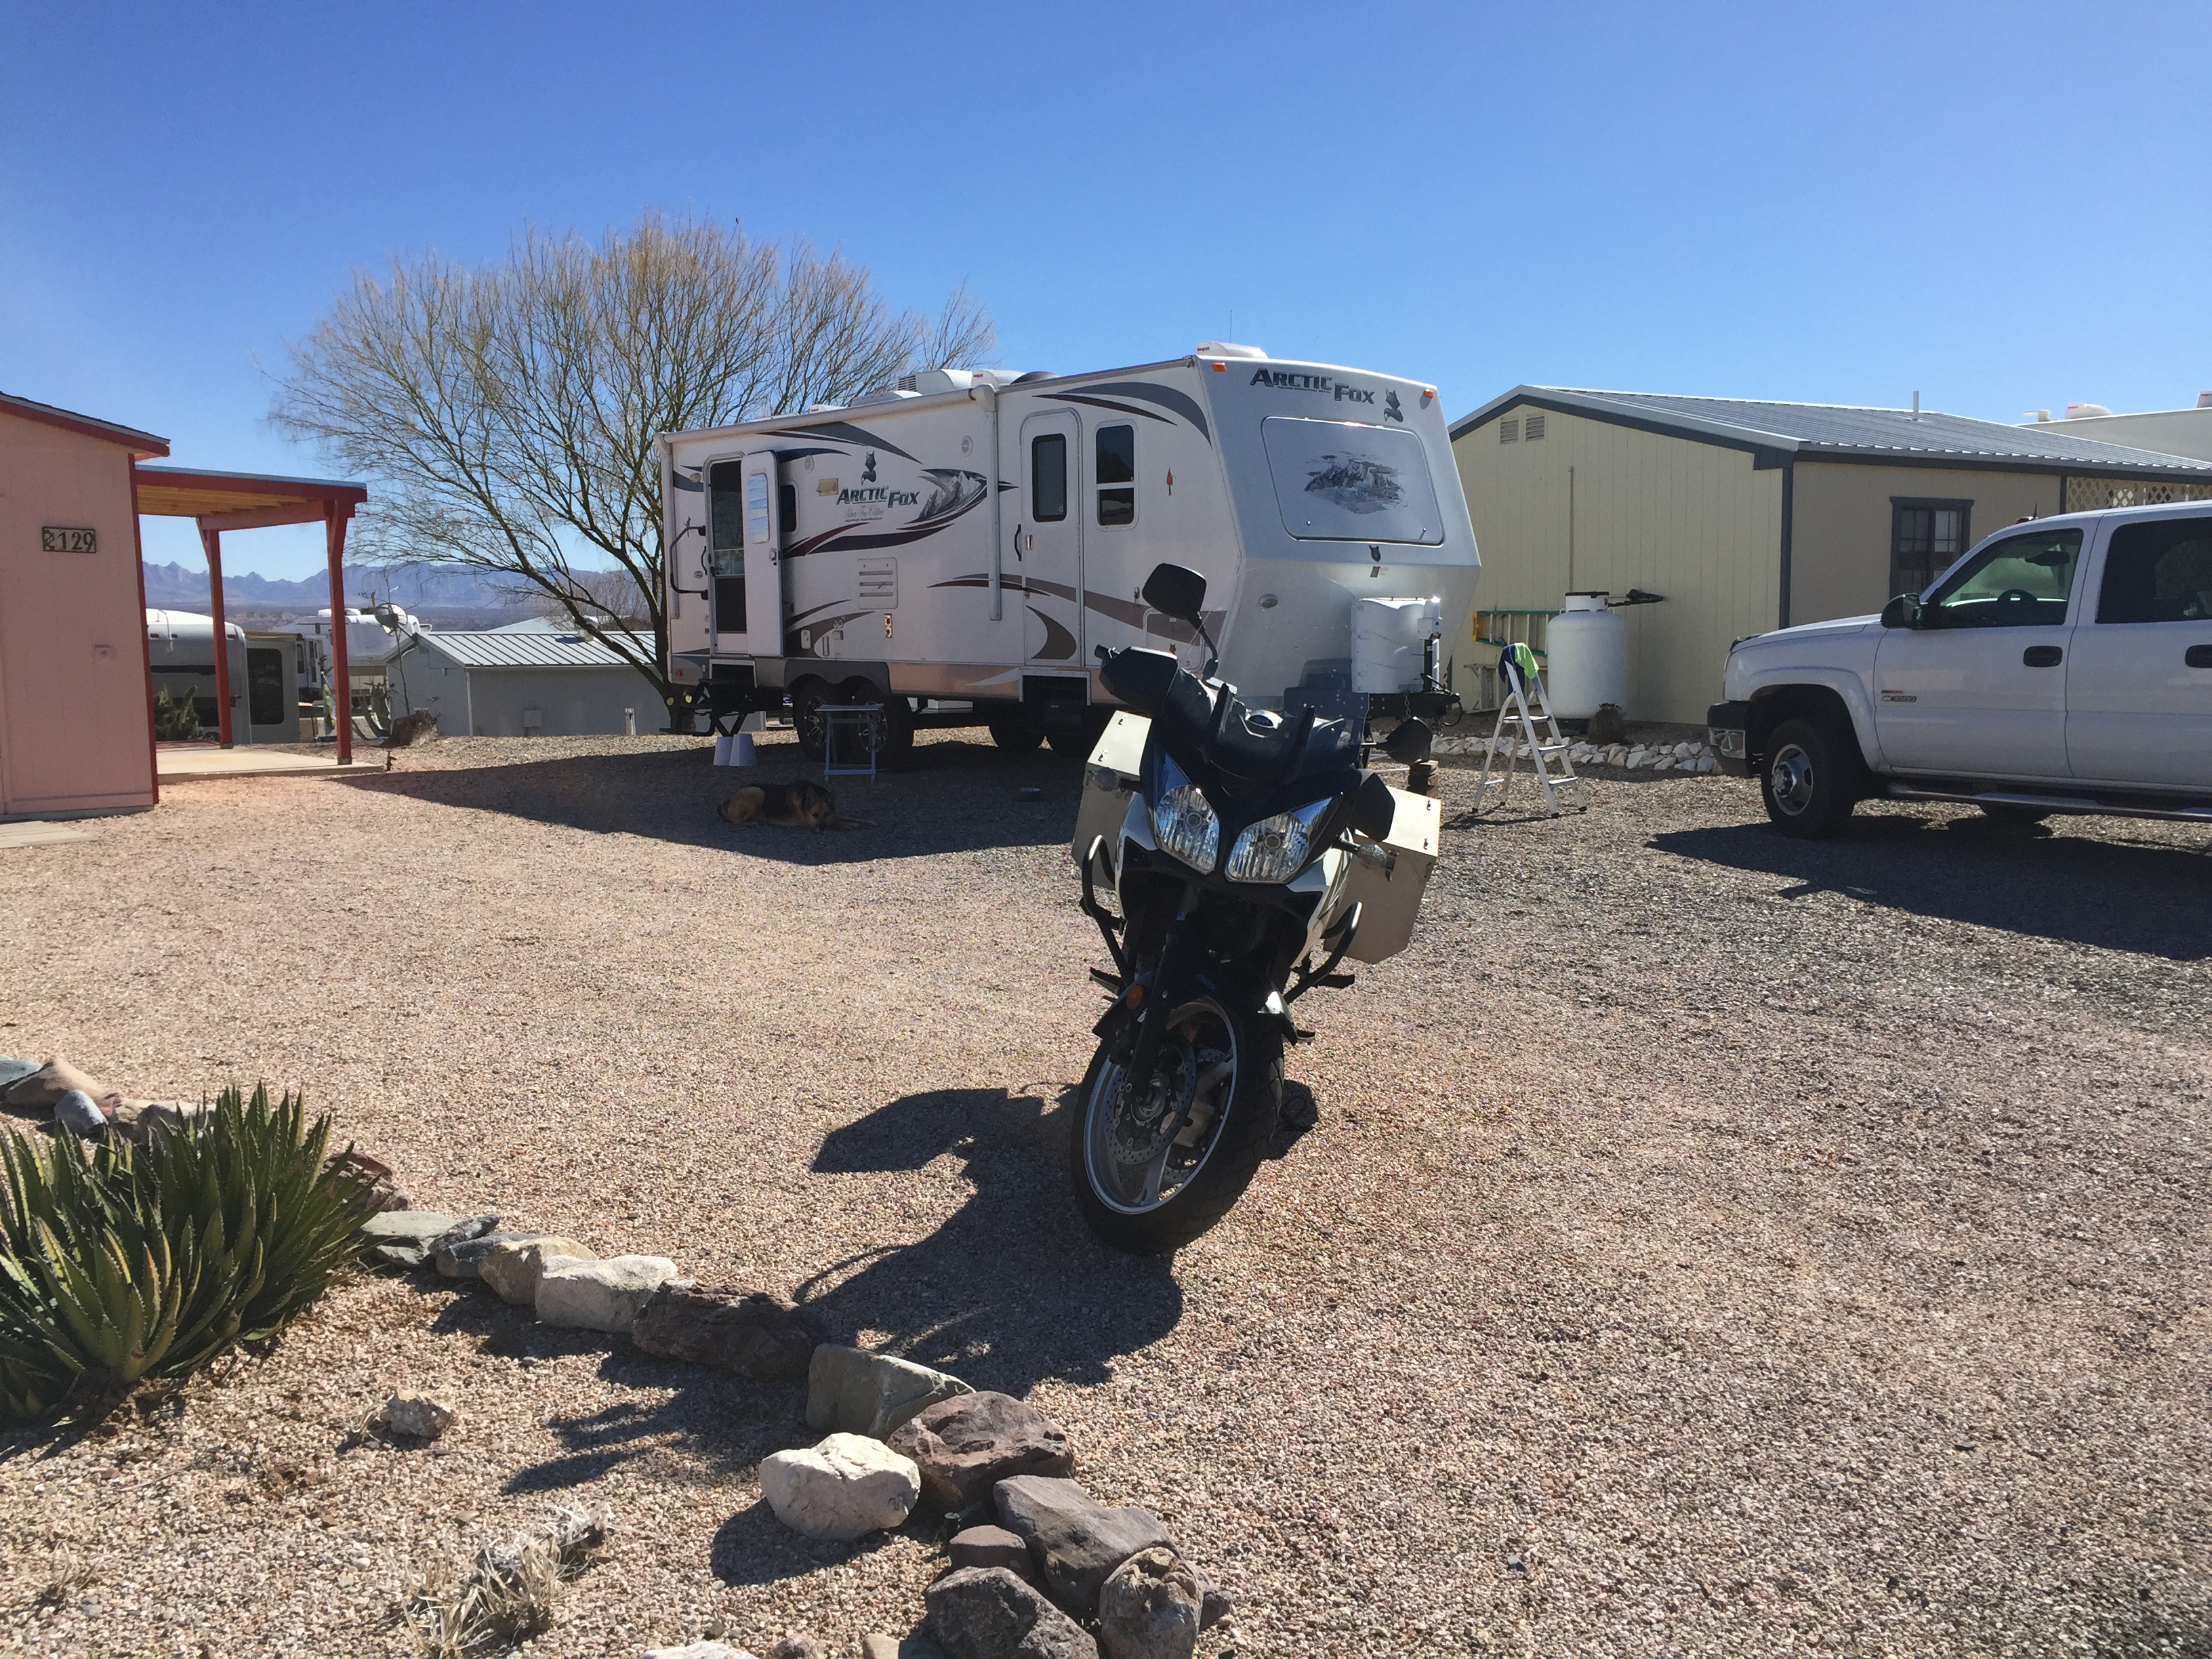 my RV and  motorcycle with Misty lying in the shade